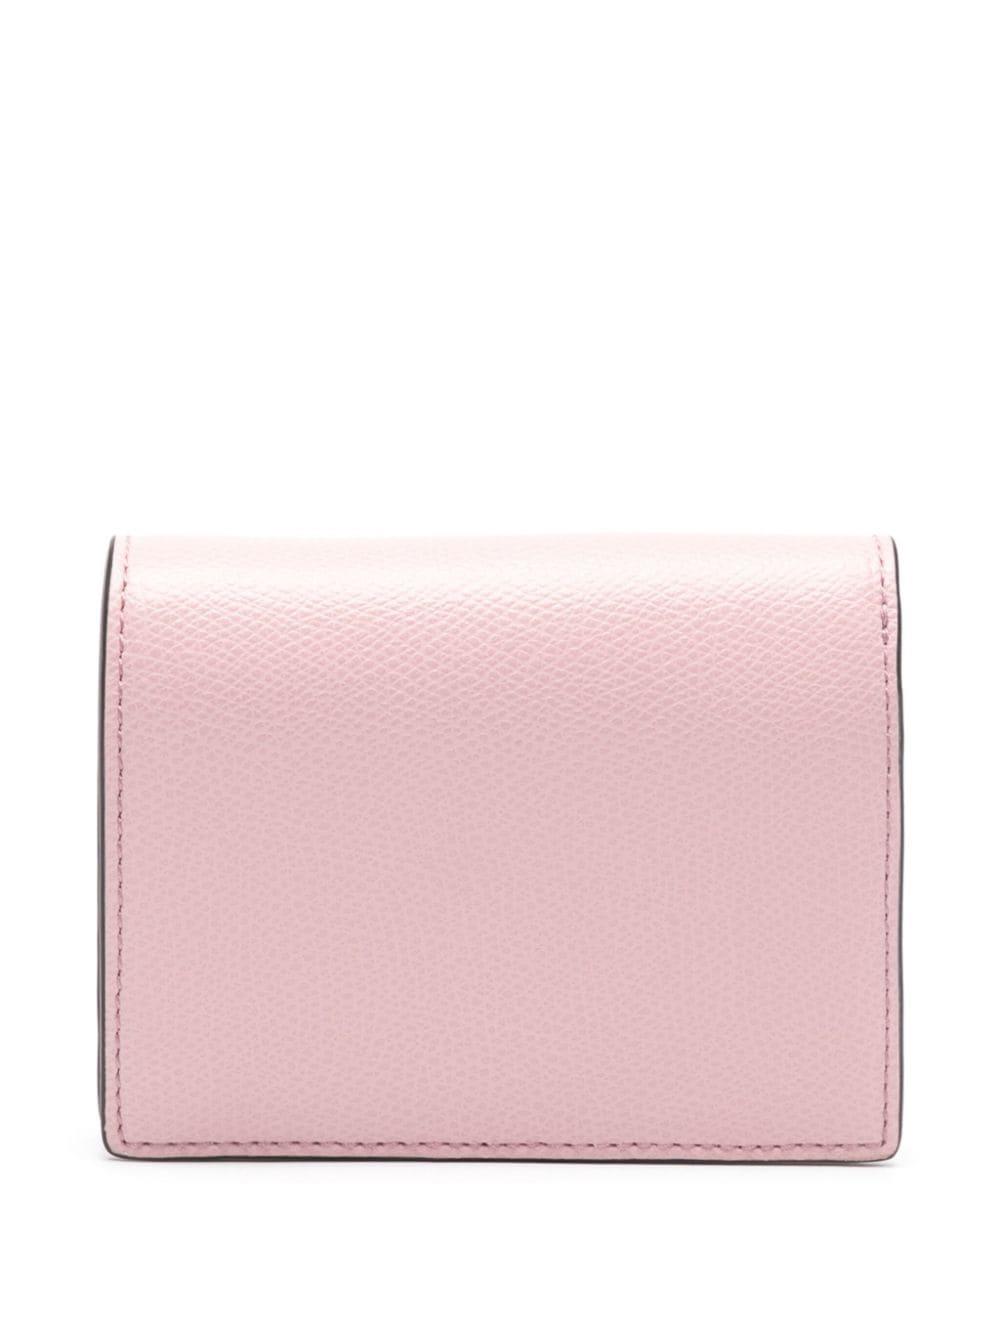 Furla small Camelia leather wallet - Pink